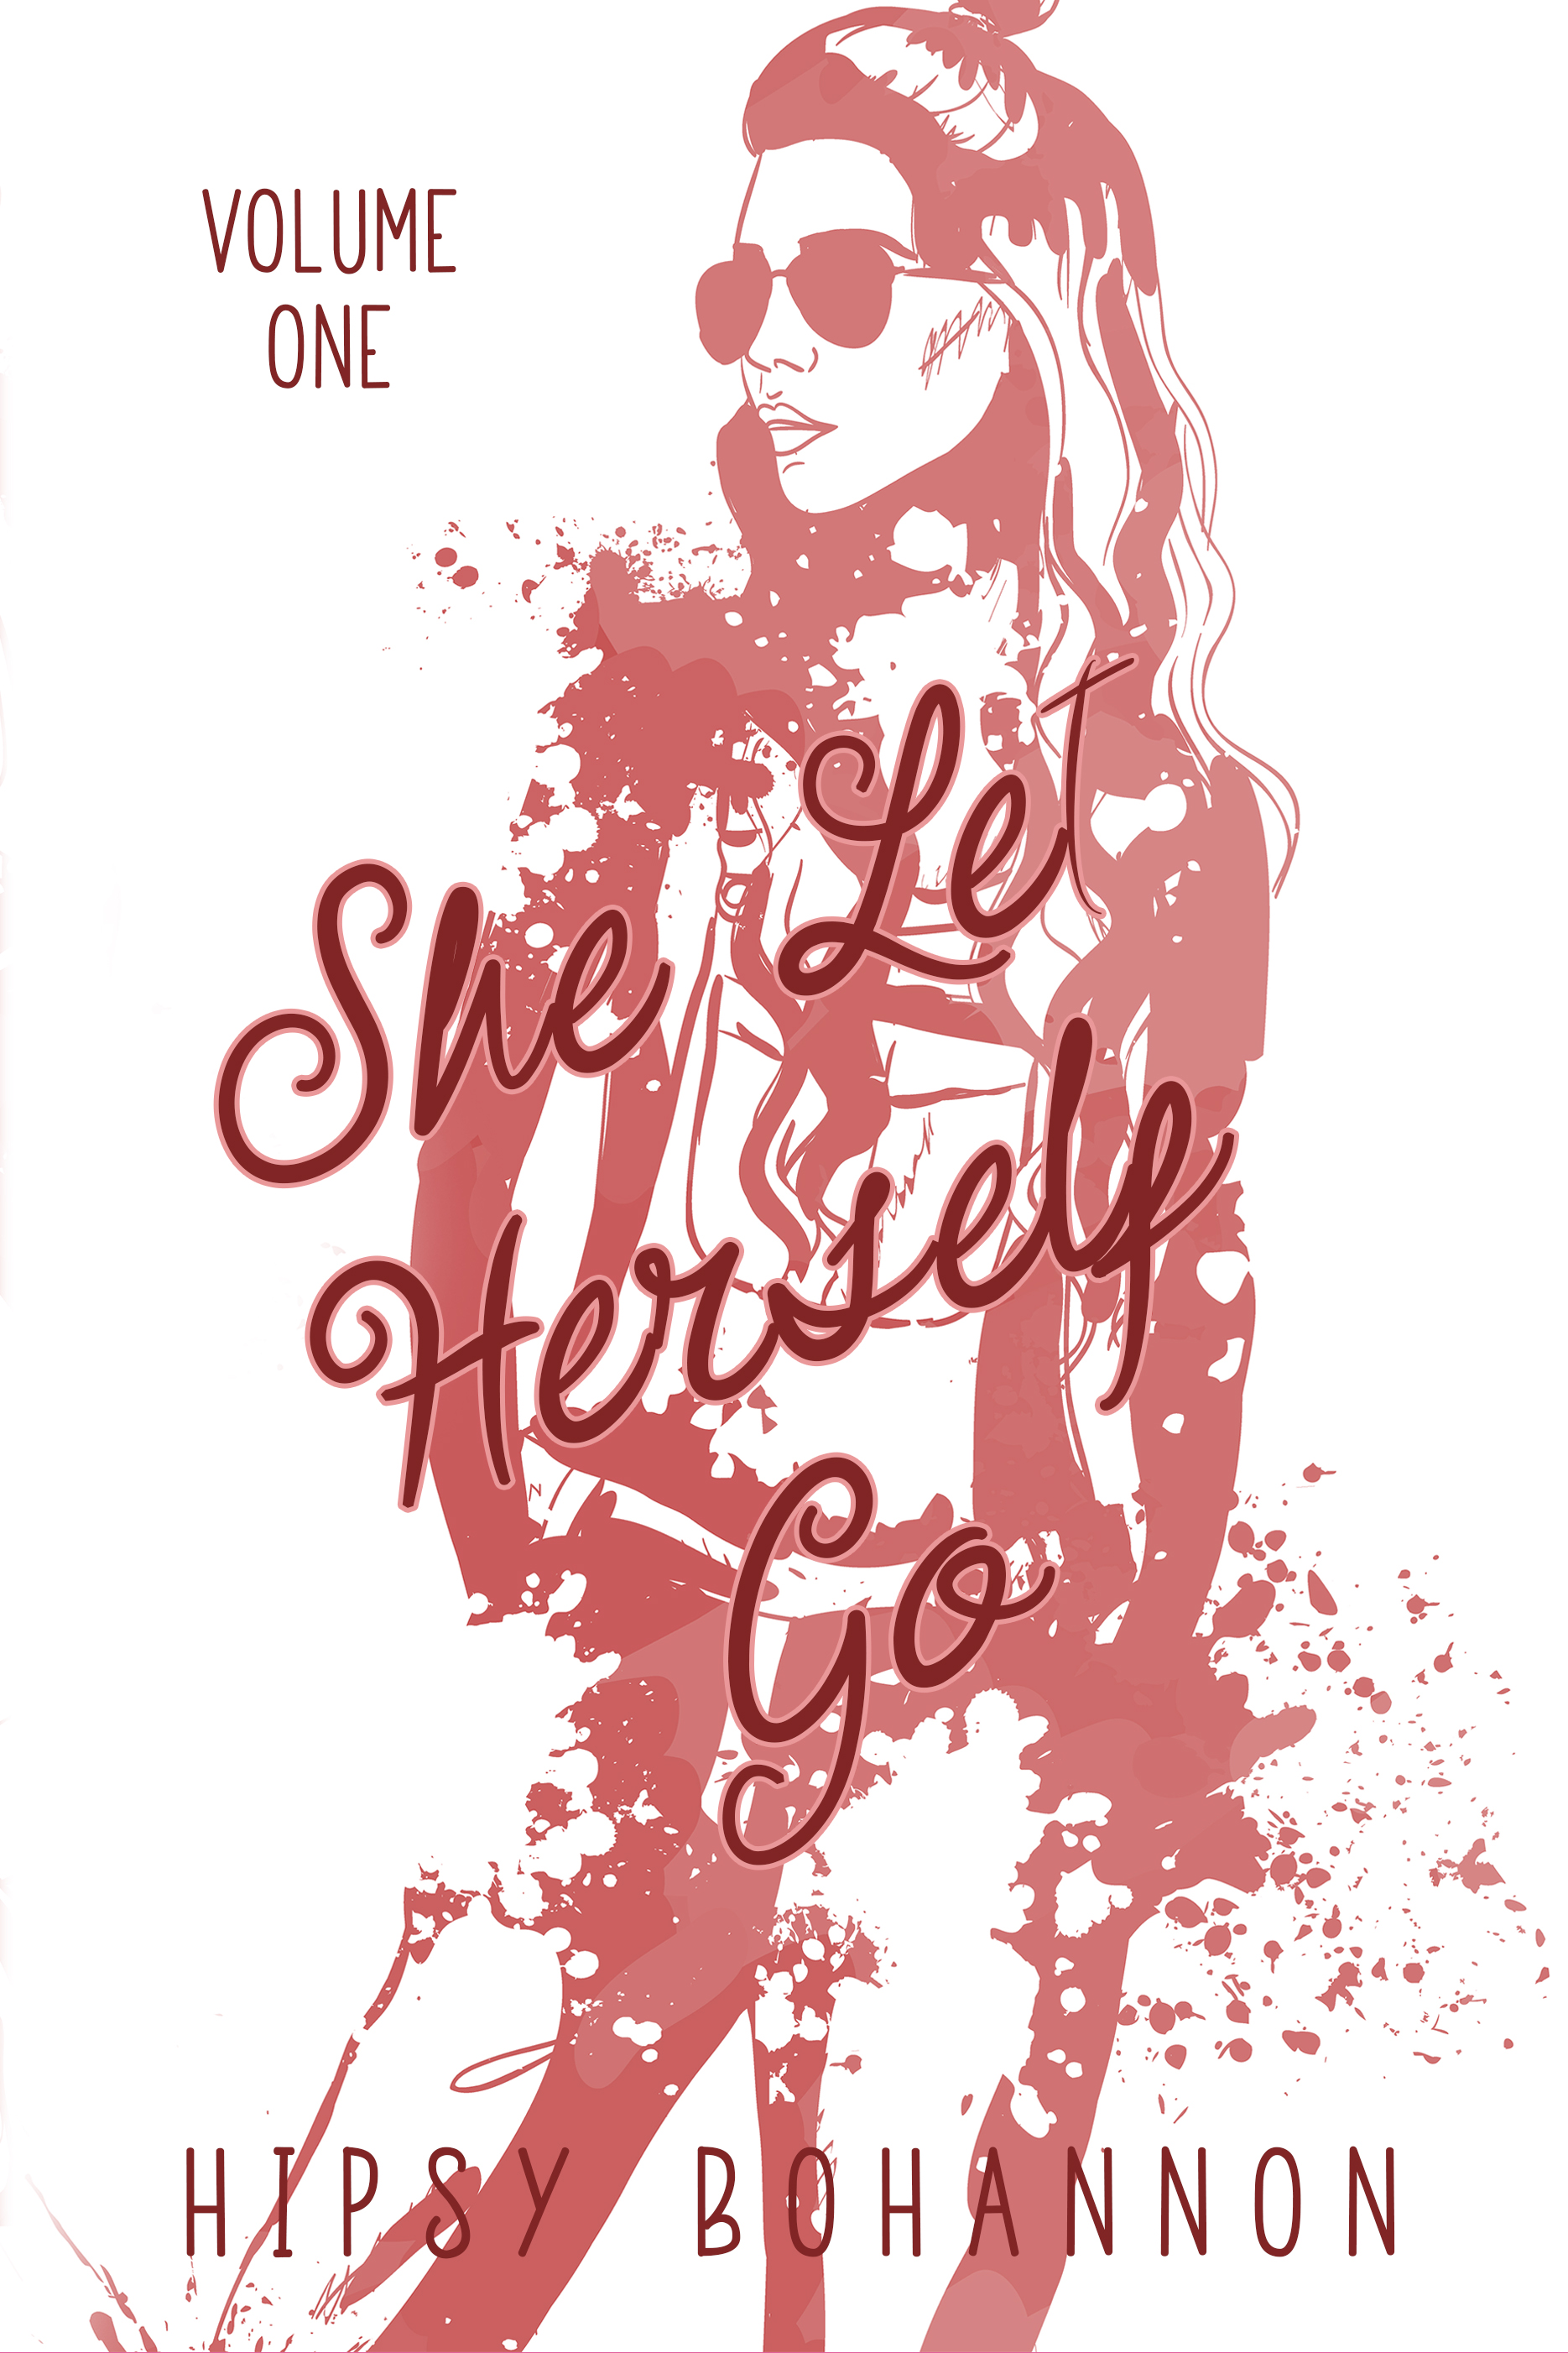 FREE: She Let Herself Go by Hipsy Bohannon